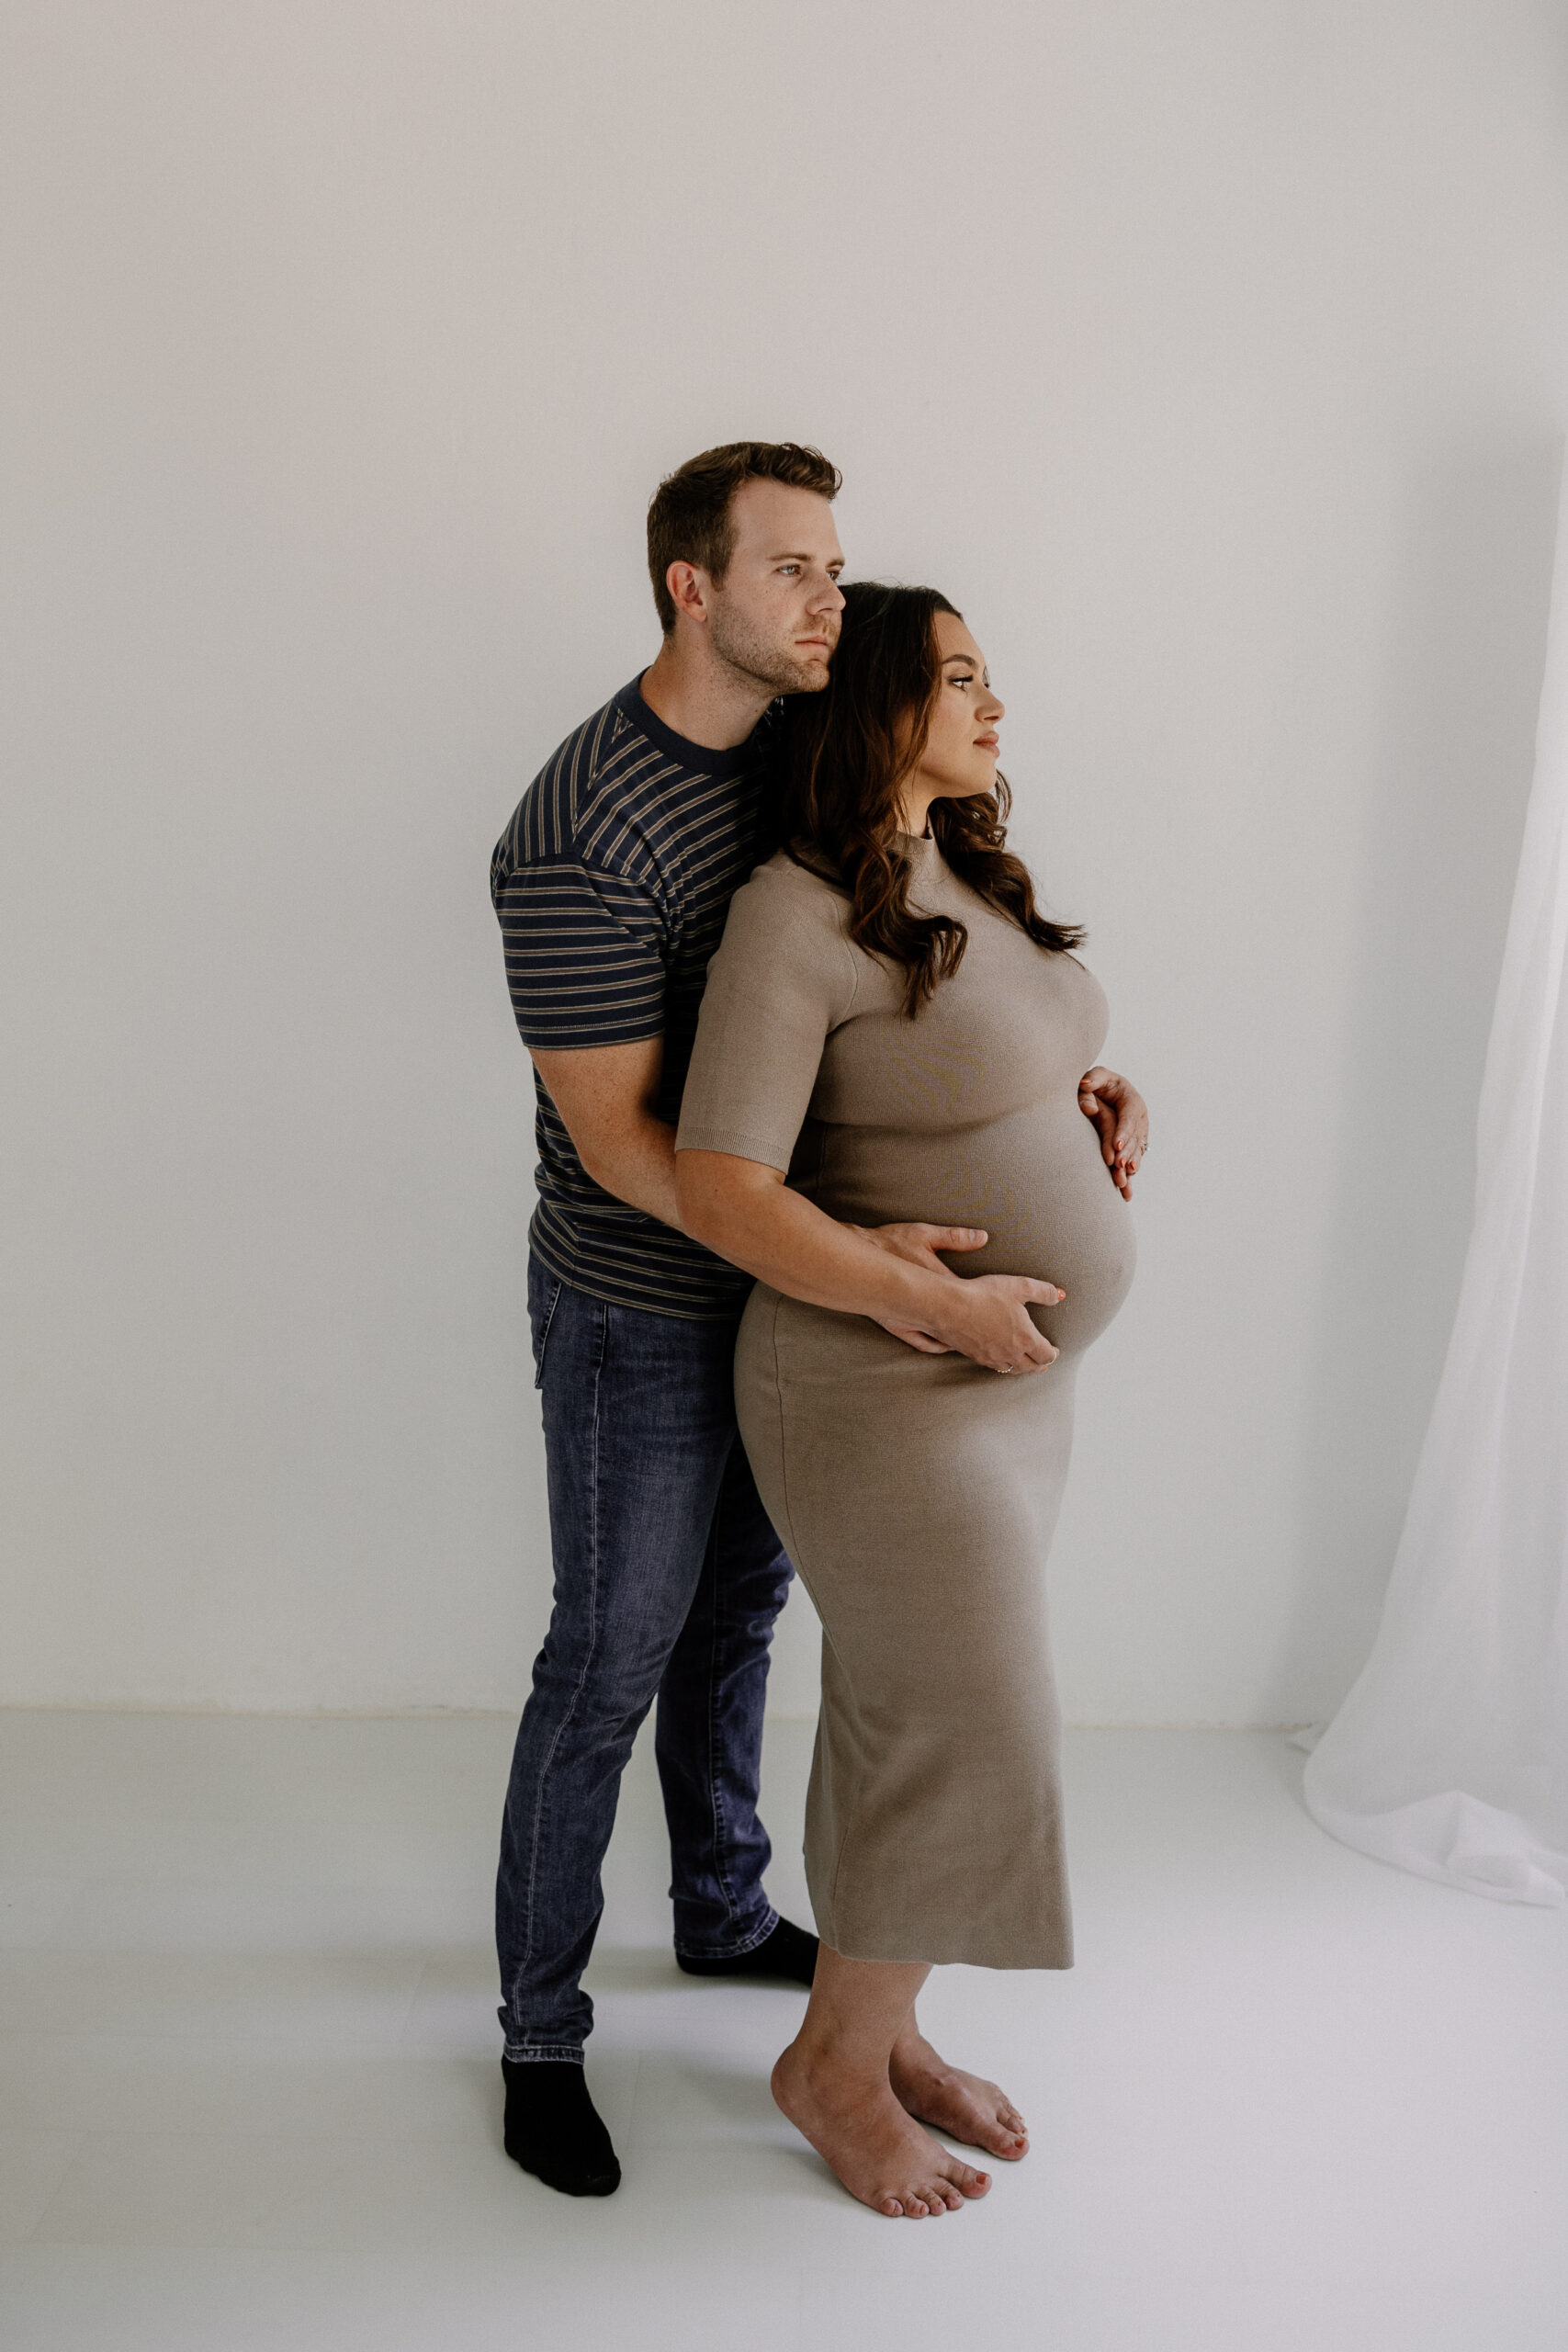 parent to be's during editorial maternity photos facing away from the camera